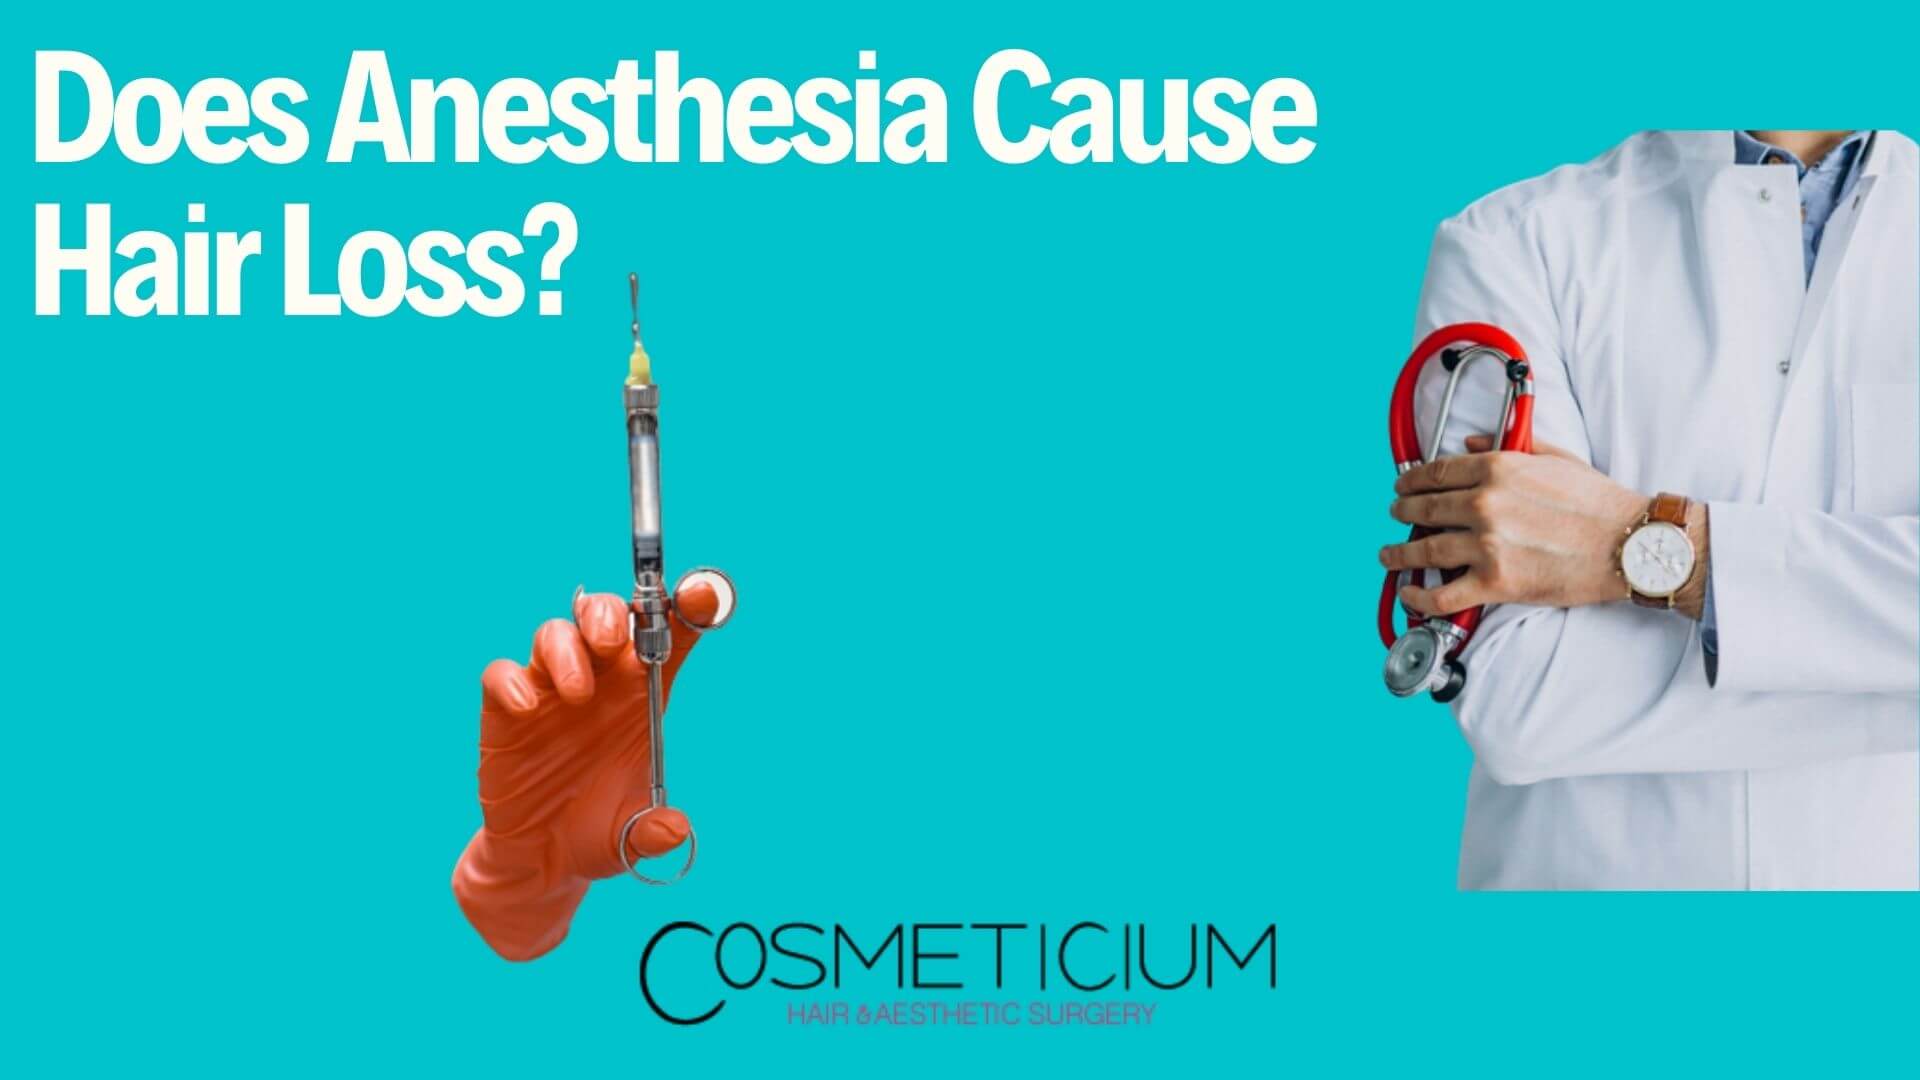 Does Anesthesia Cause Hair Loss? What Do Experts Say About It!